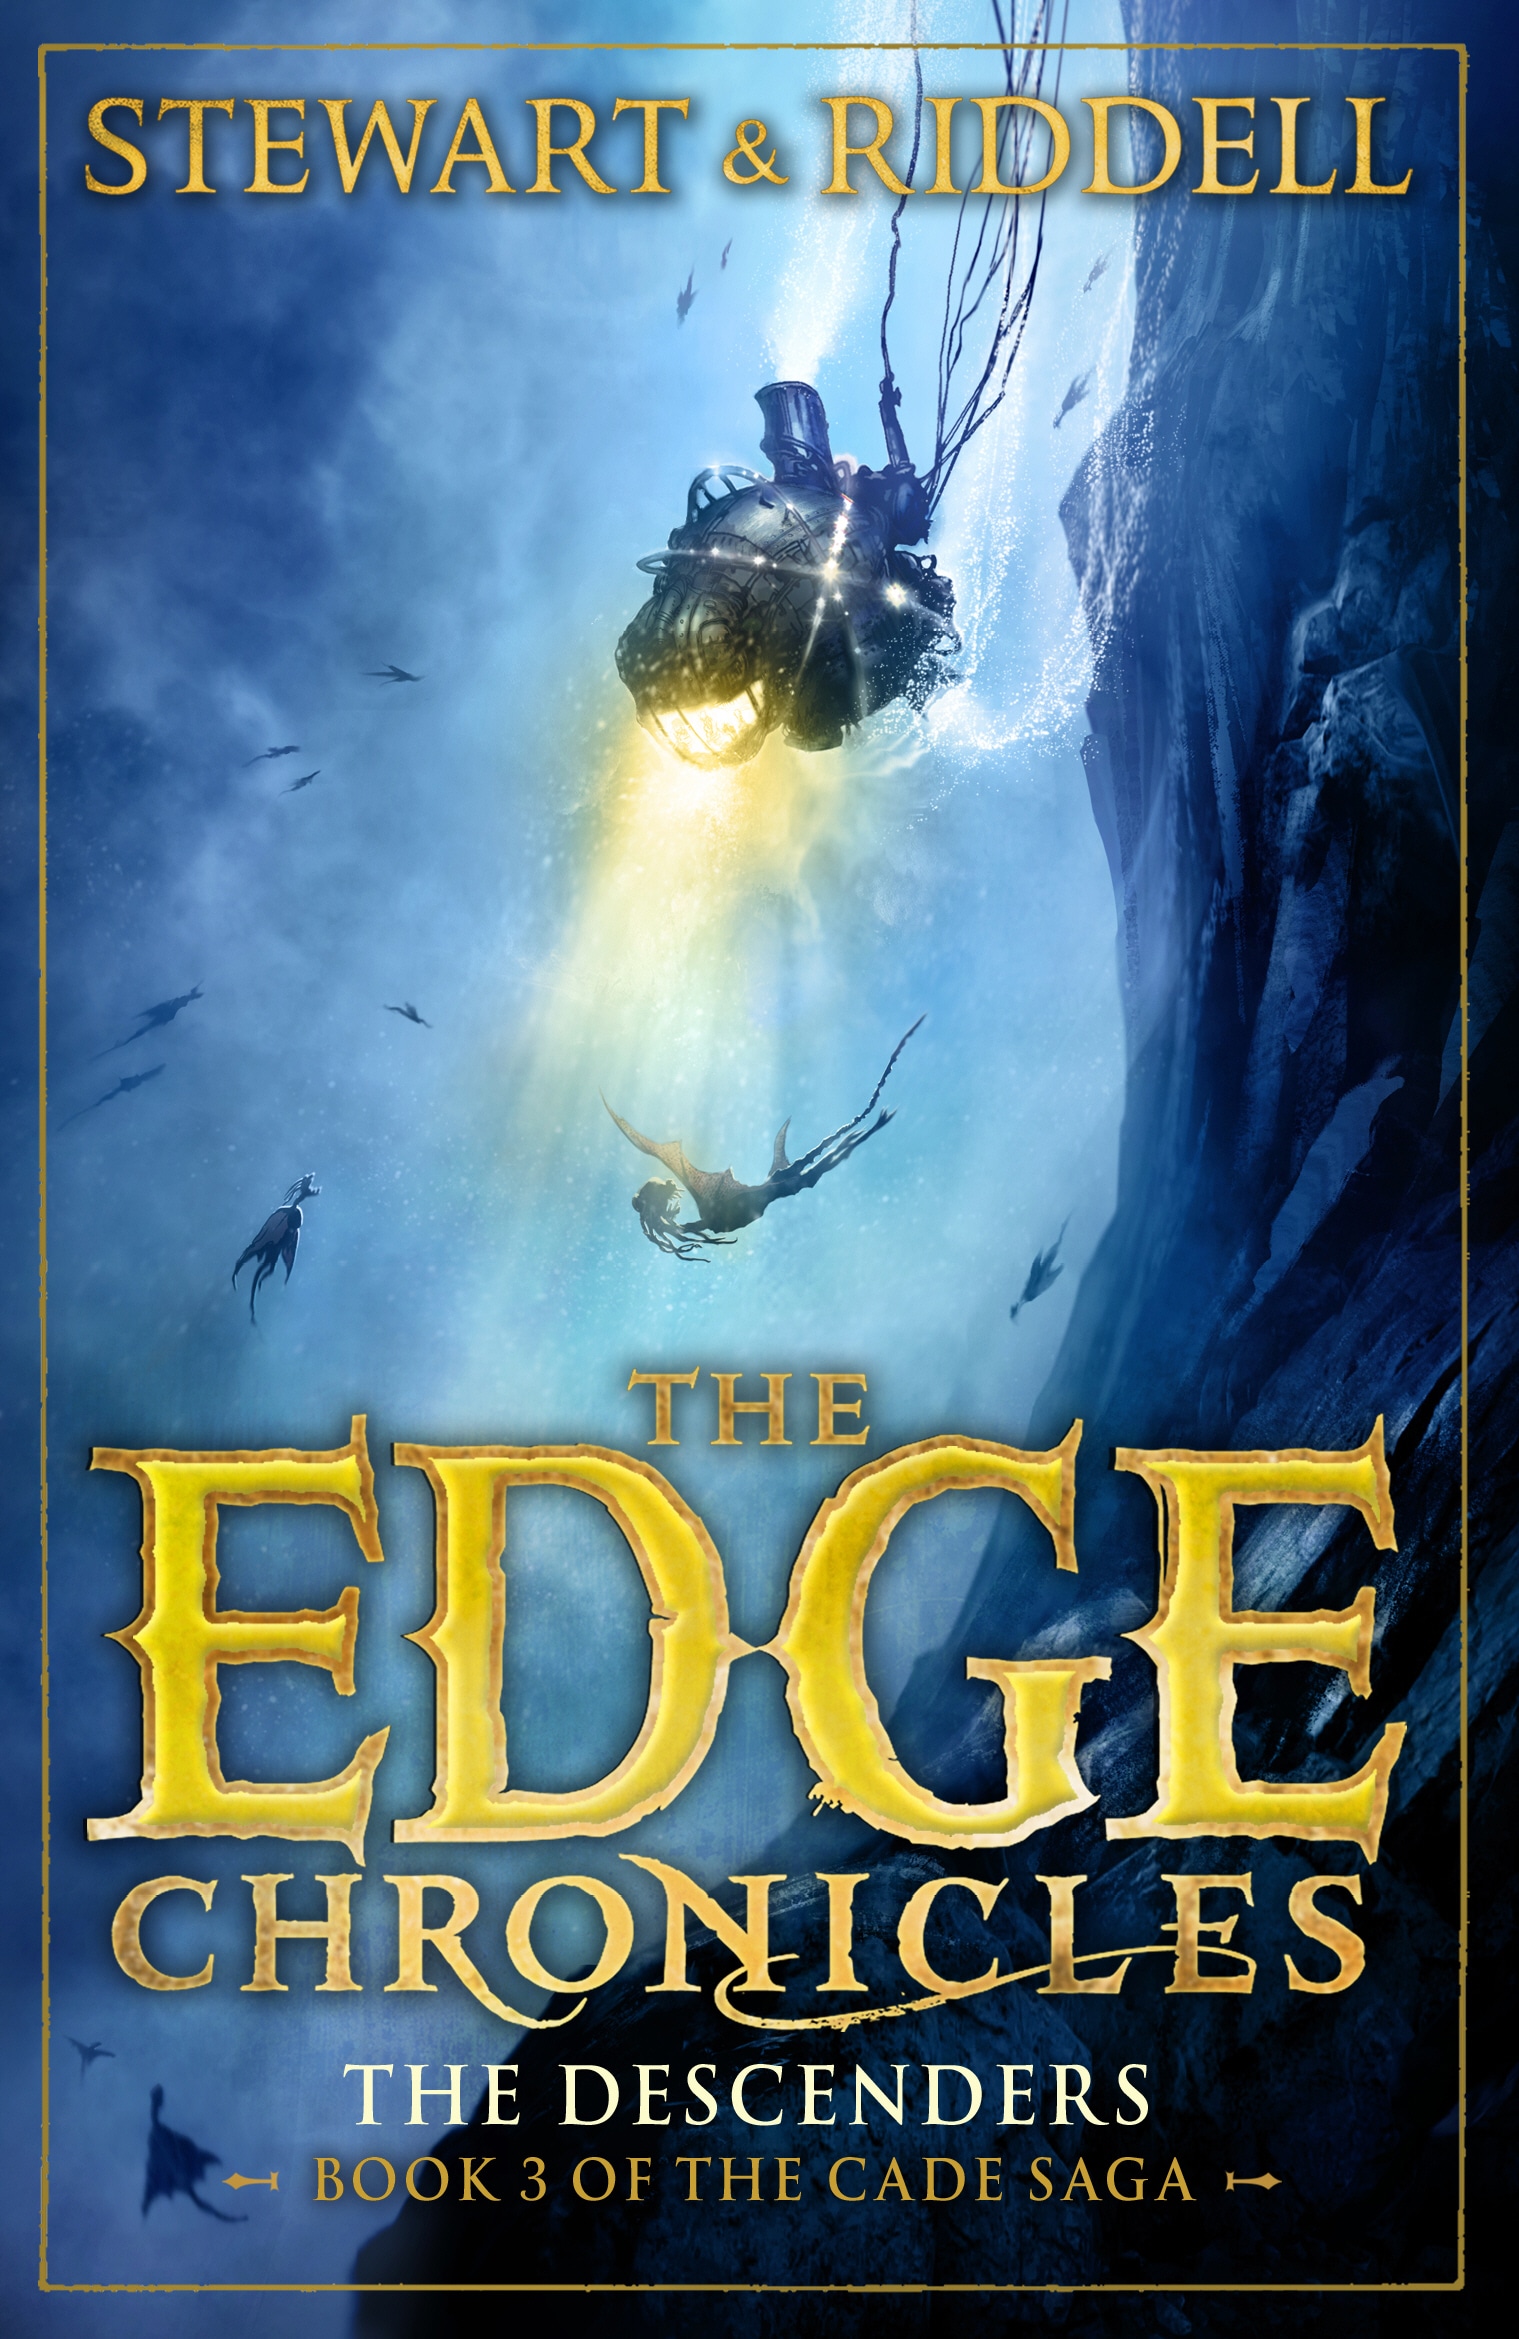 Book “The Edge Chronicles 13: The Descenders” by Paul Stewart, Chris Riddell — March 7, 2019